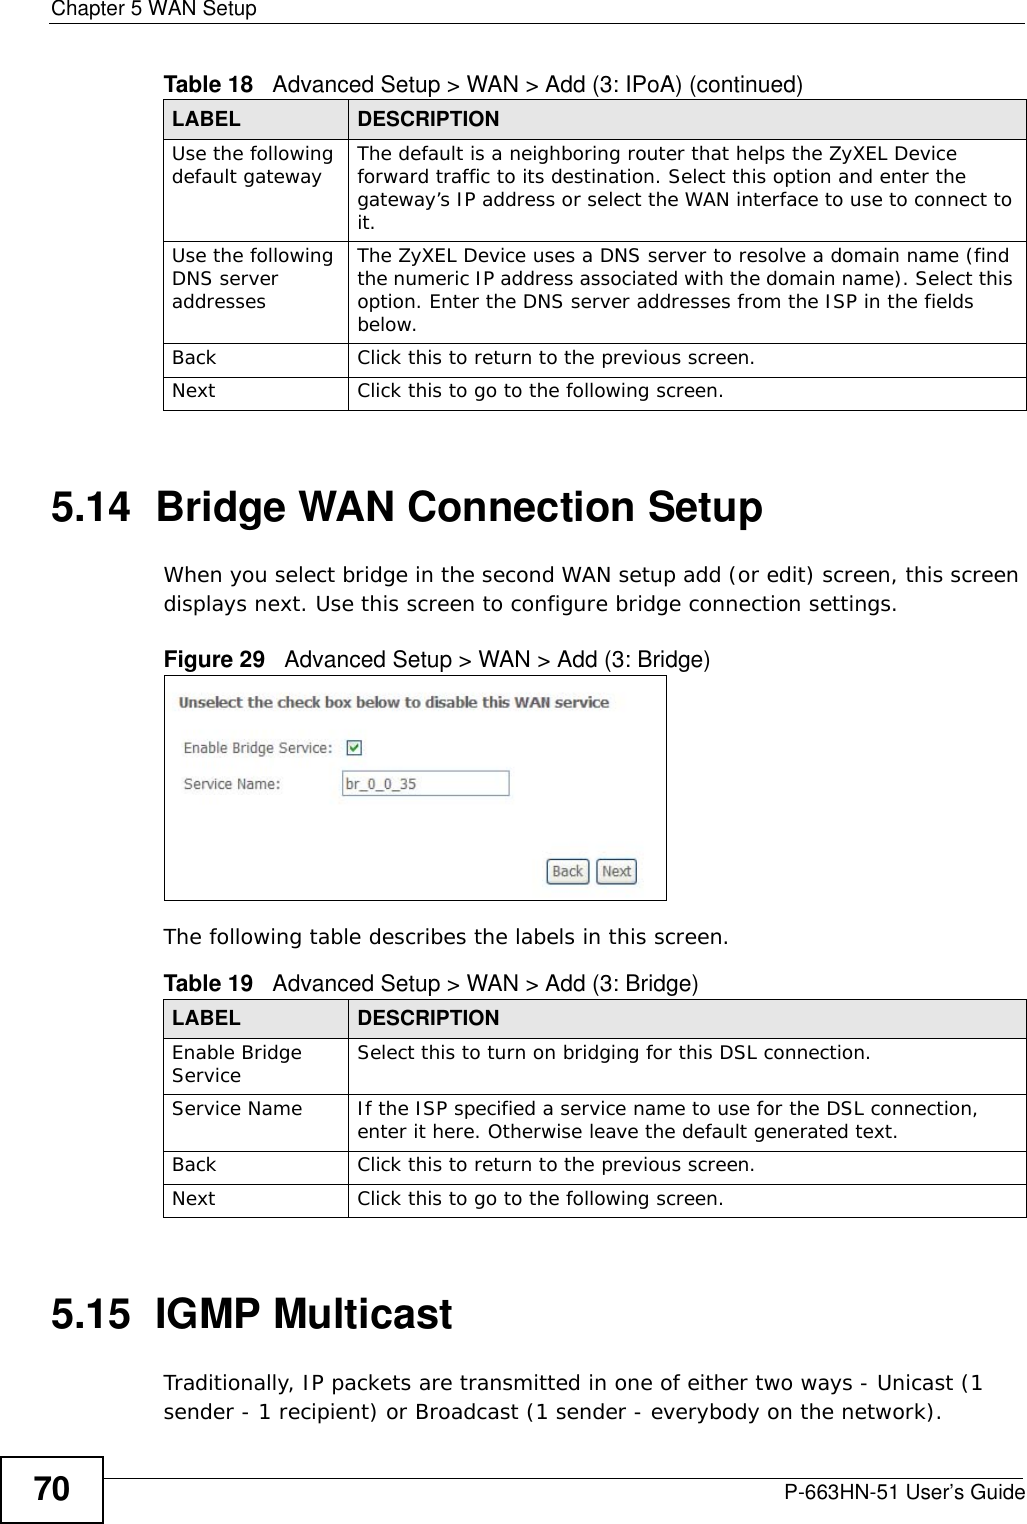 Chapter 5 WAN SetupP-663HN-51 User’s Guide705.14  Bridge WAN Connection Setup When you select bridge in the second WAN setup add (or edit) screen, this screen displays next. Use this screen to configure bridge connection settings.Figure 29   Advanced Setup &gt; WAN &gt; Add (3: Bridge)The following table describes the labels in this screen.  5.15  IGMP MulticastTraditionally, IP packets are transmitted in one of either two ways - Unicast (1 sender - 1 recipient) or Broadcast (1 sender - everybody on the network). Use the following default gateway The default is a neighboring router that helps the ZyXEL Device forward traffic to its destination. Select this option and enter the gateway’s IP address or select the WAN interface to use to connect to it. Use the following DNS server addresses The ZyXEL Device uses a DNS server to resolve a domain name (find the numeric IP address associated with the domain name). Select this option. Enter the DNS server addresses from the ISP in the fields below.  Back Click this to return to the previous screen.Next Click this to go to the following screen.Table 18   Advanced Setup &gt; WAN &gt; Add (3: IPoA) (continued)LABEL DESCRIPTIONTable 19   Advanced Setup &gt; WAN &gt; Add (3: Bridge)LABEL DESCRIPTIONEnable Bridge Service Select this to turn on bridging for this DSL connection.Service Name If the ISP specified a service name to use for the DSL connection, enter it here. Otherwise leave the default generated text.Back Click this to return to the previous screen.Next Click this to go to the following screen.